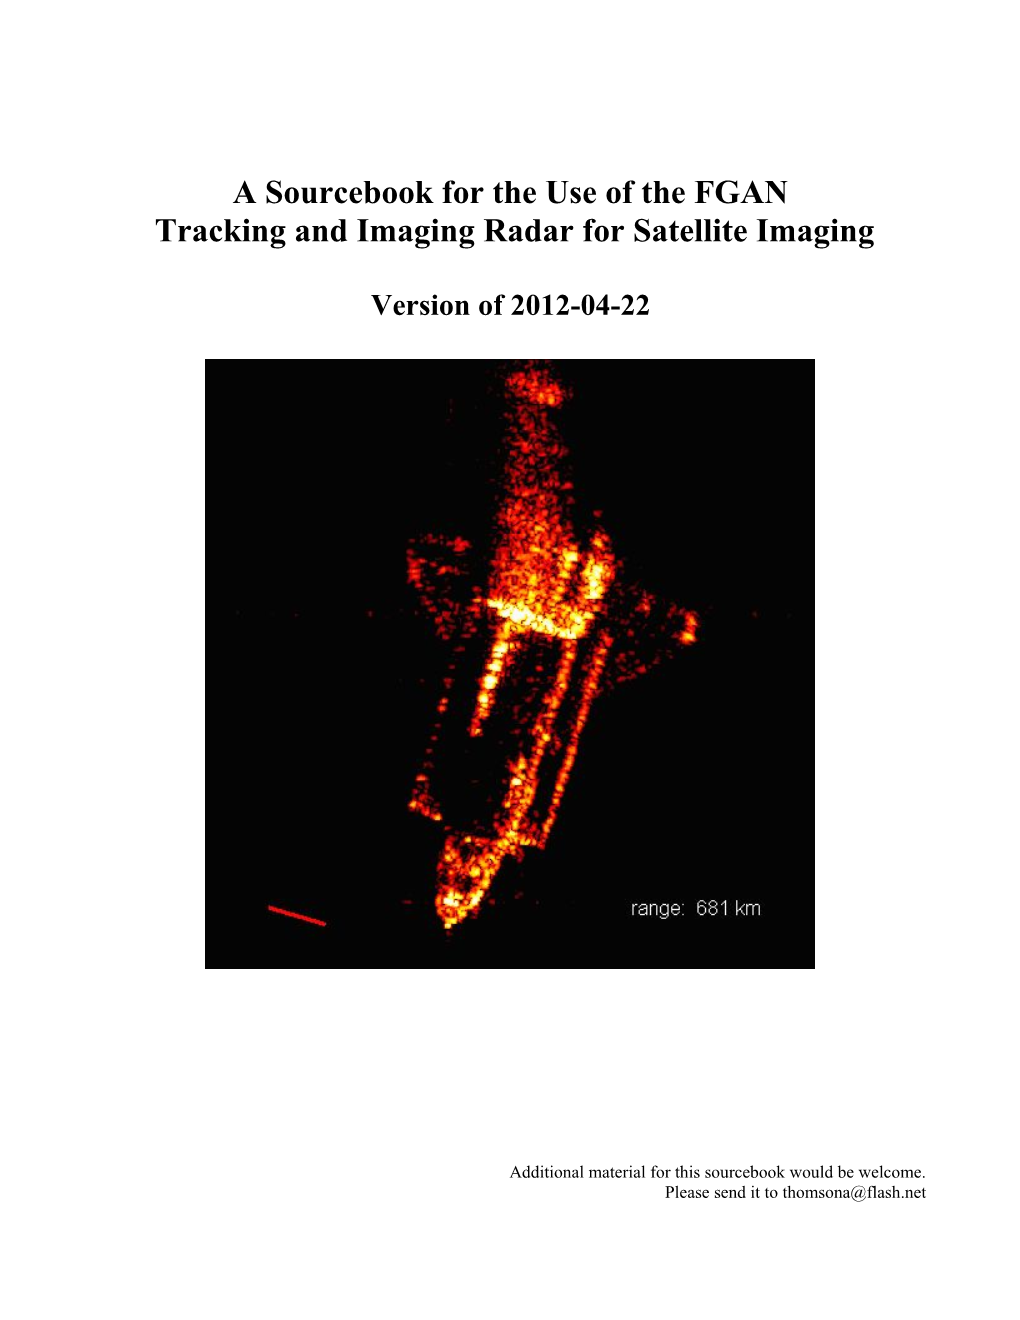 A Sourcebook for the Use of the FGAN Tracking and Imaging Radar for Satellite Imaging